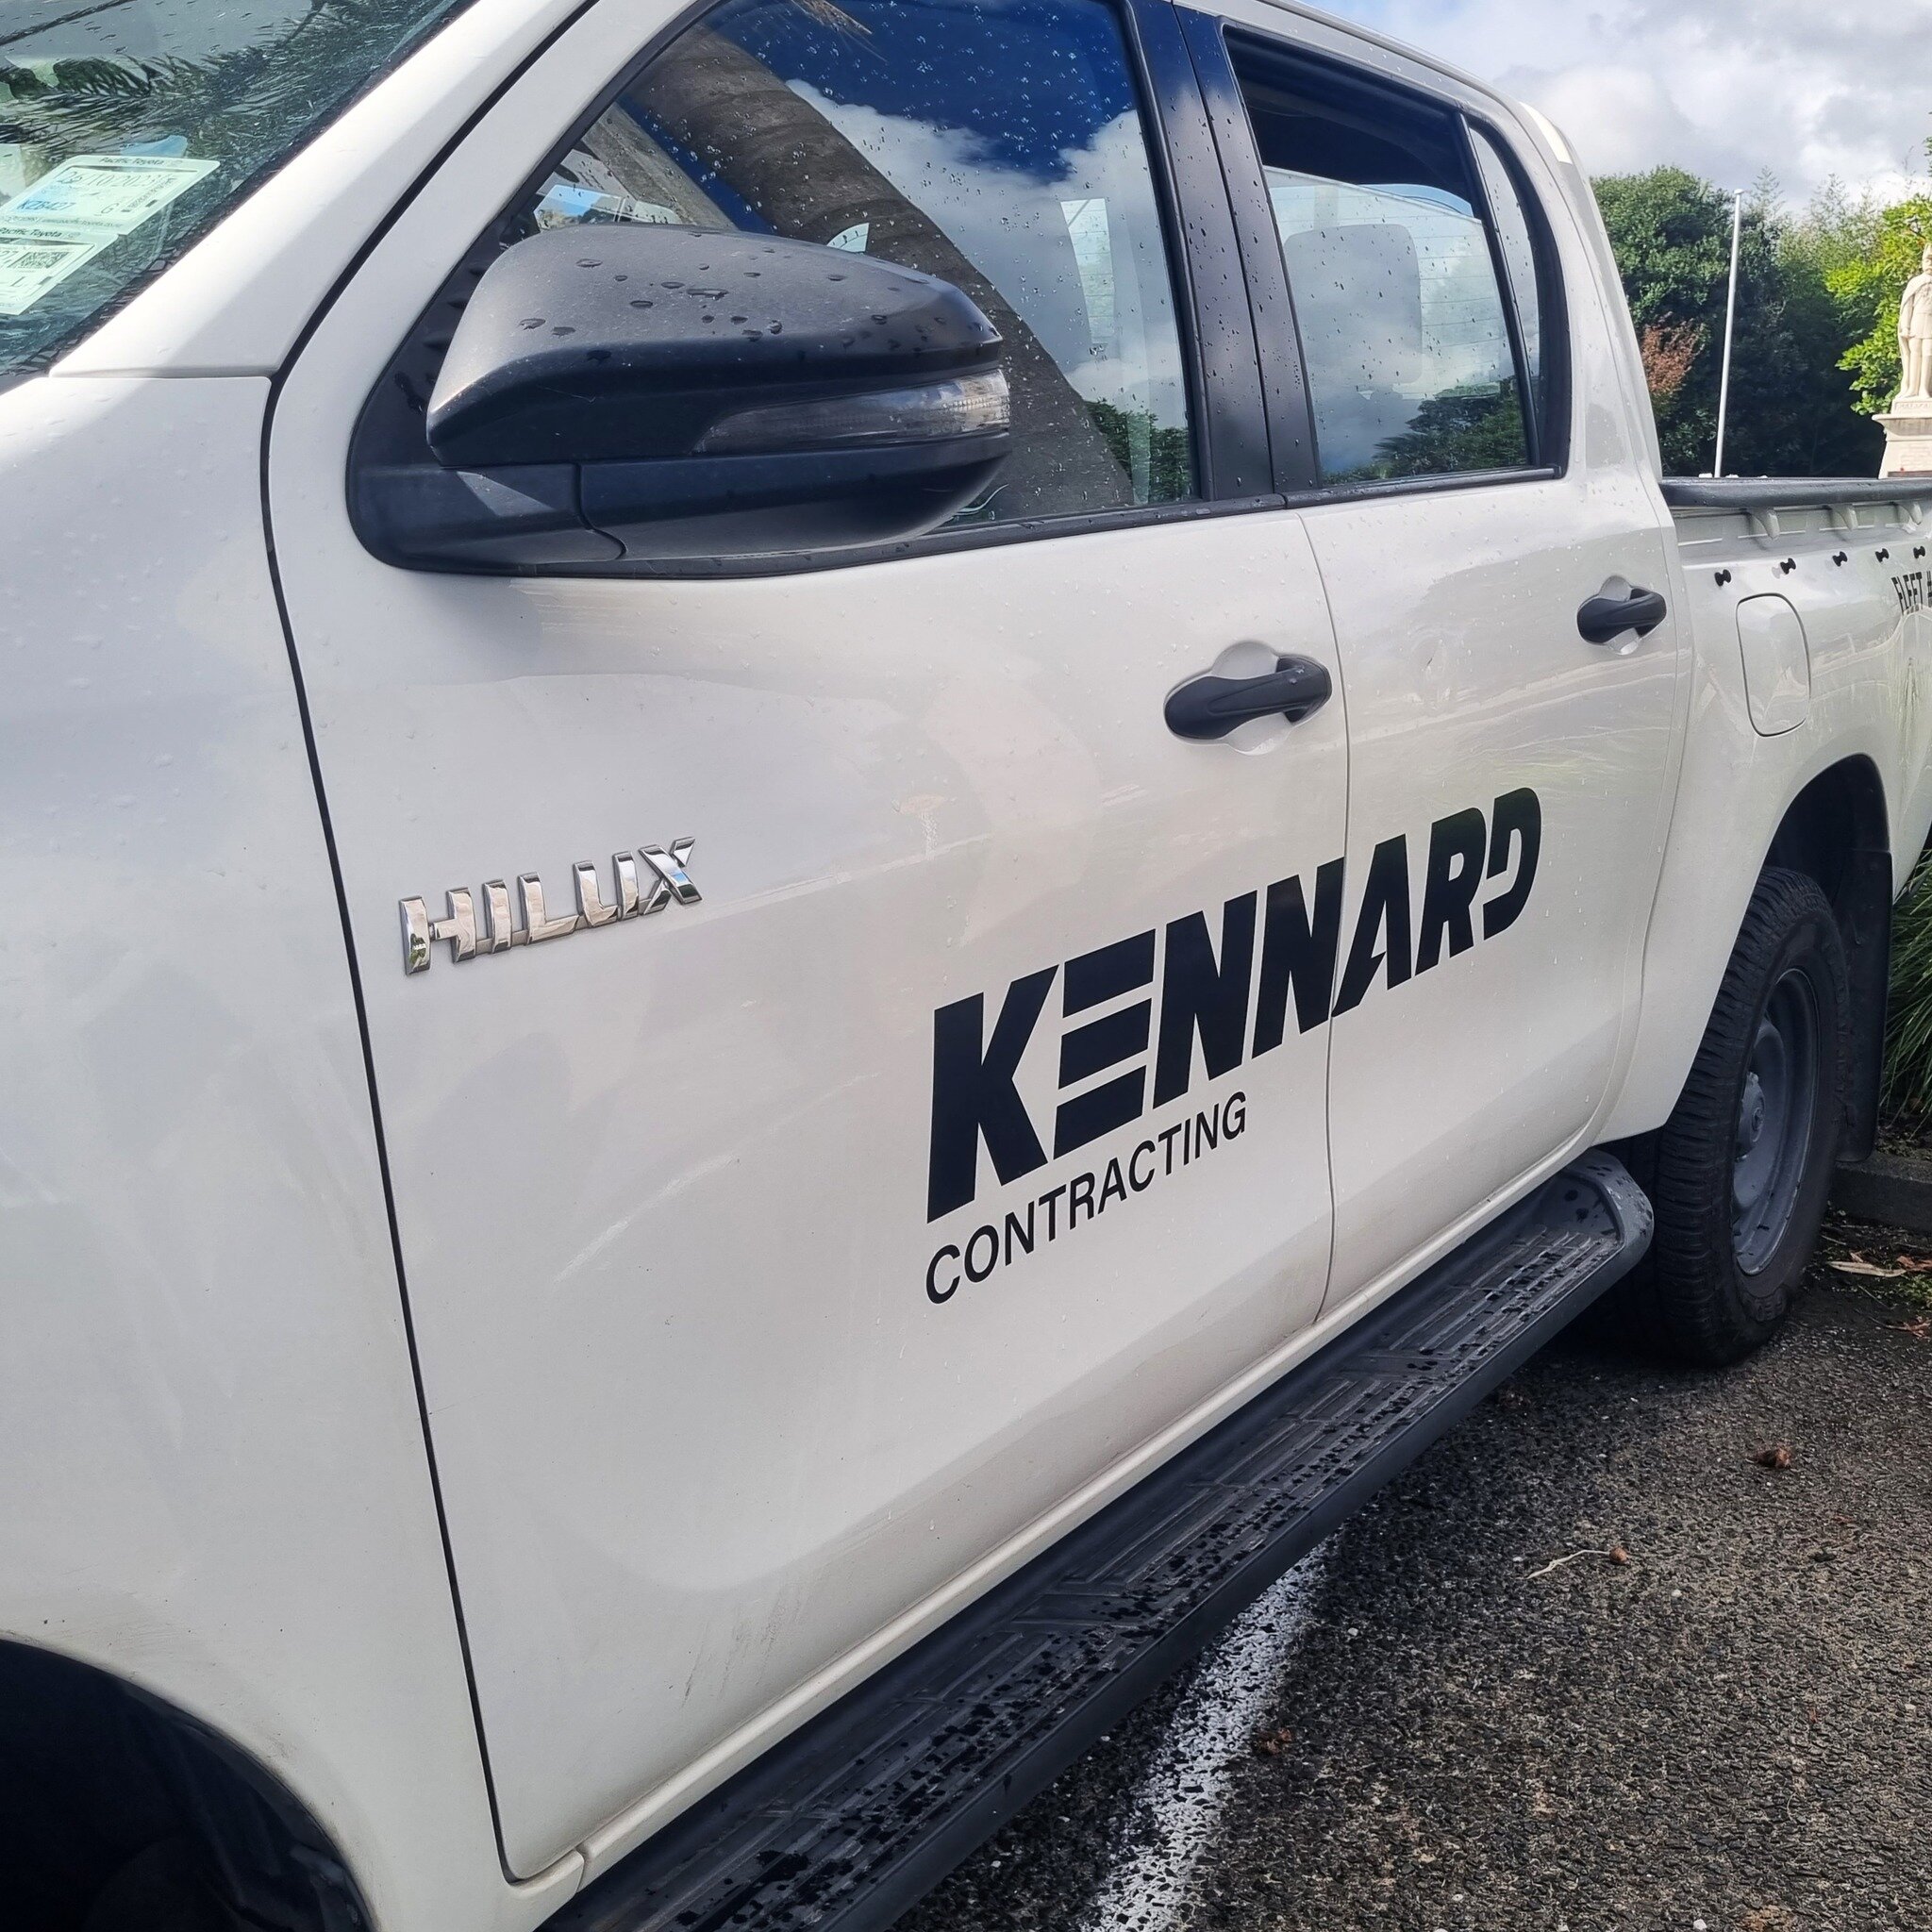 Roll out your brand's full potential with vehicle decals, completing the ultimate branding package for unrivalled presence on the streets of New Zealand. Did you know we design, print and install decals from our studio in Matakana Village!